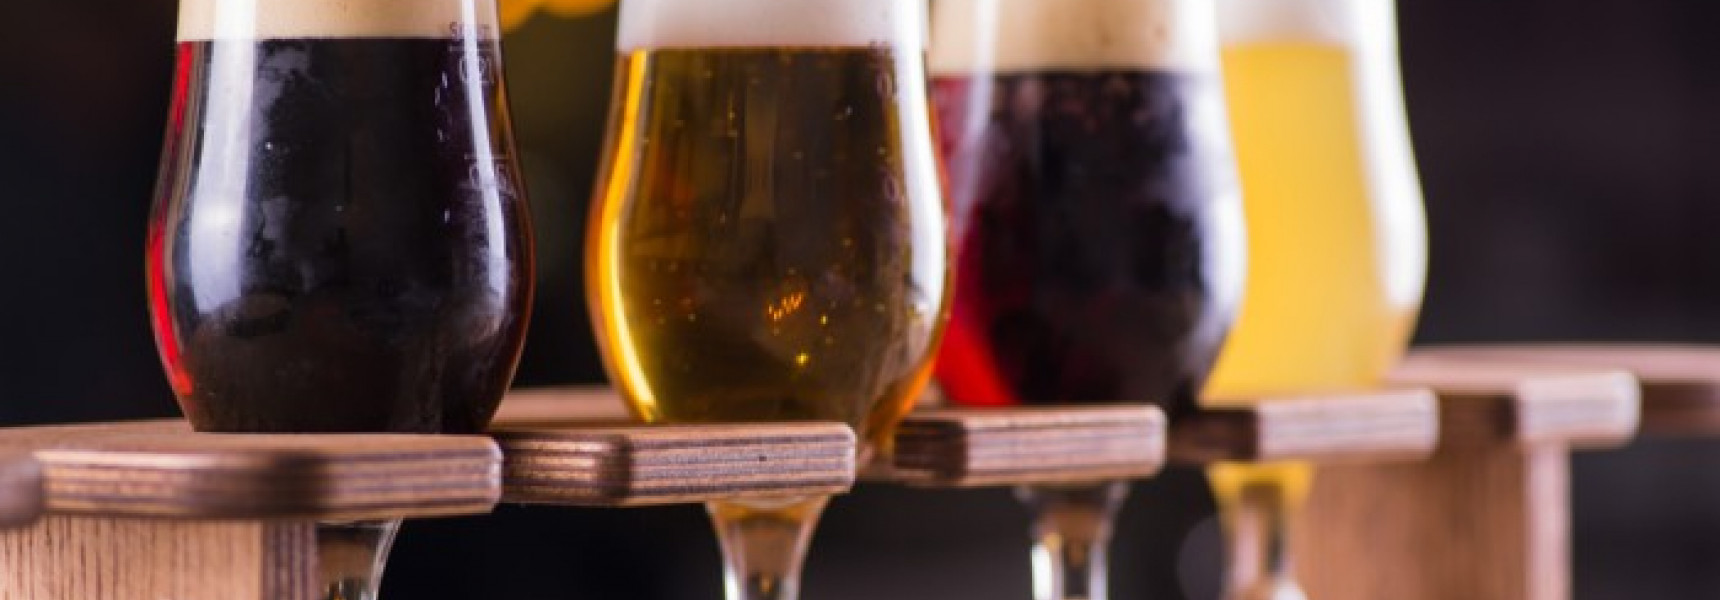 A guide to Belgian Beer in Brussels